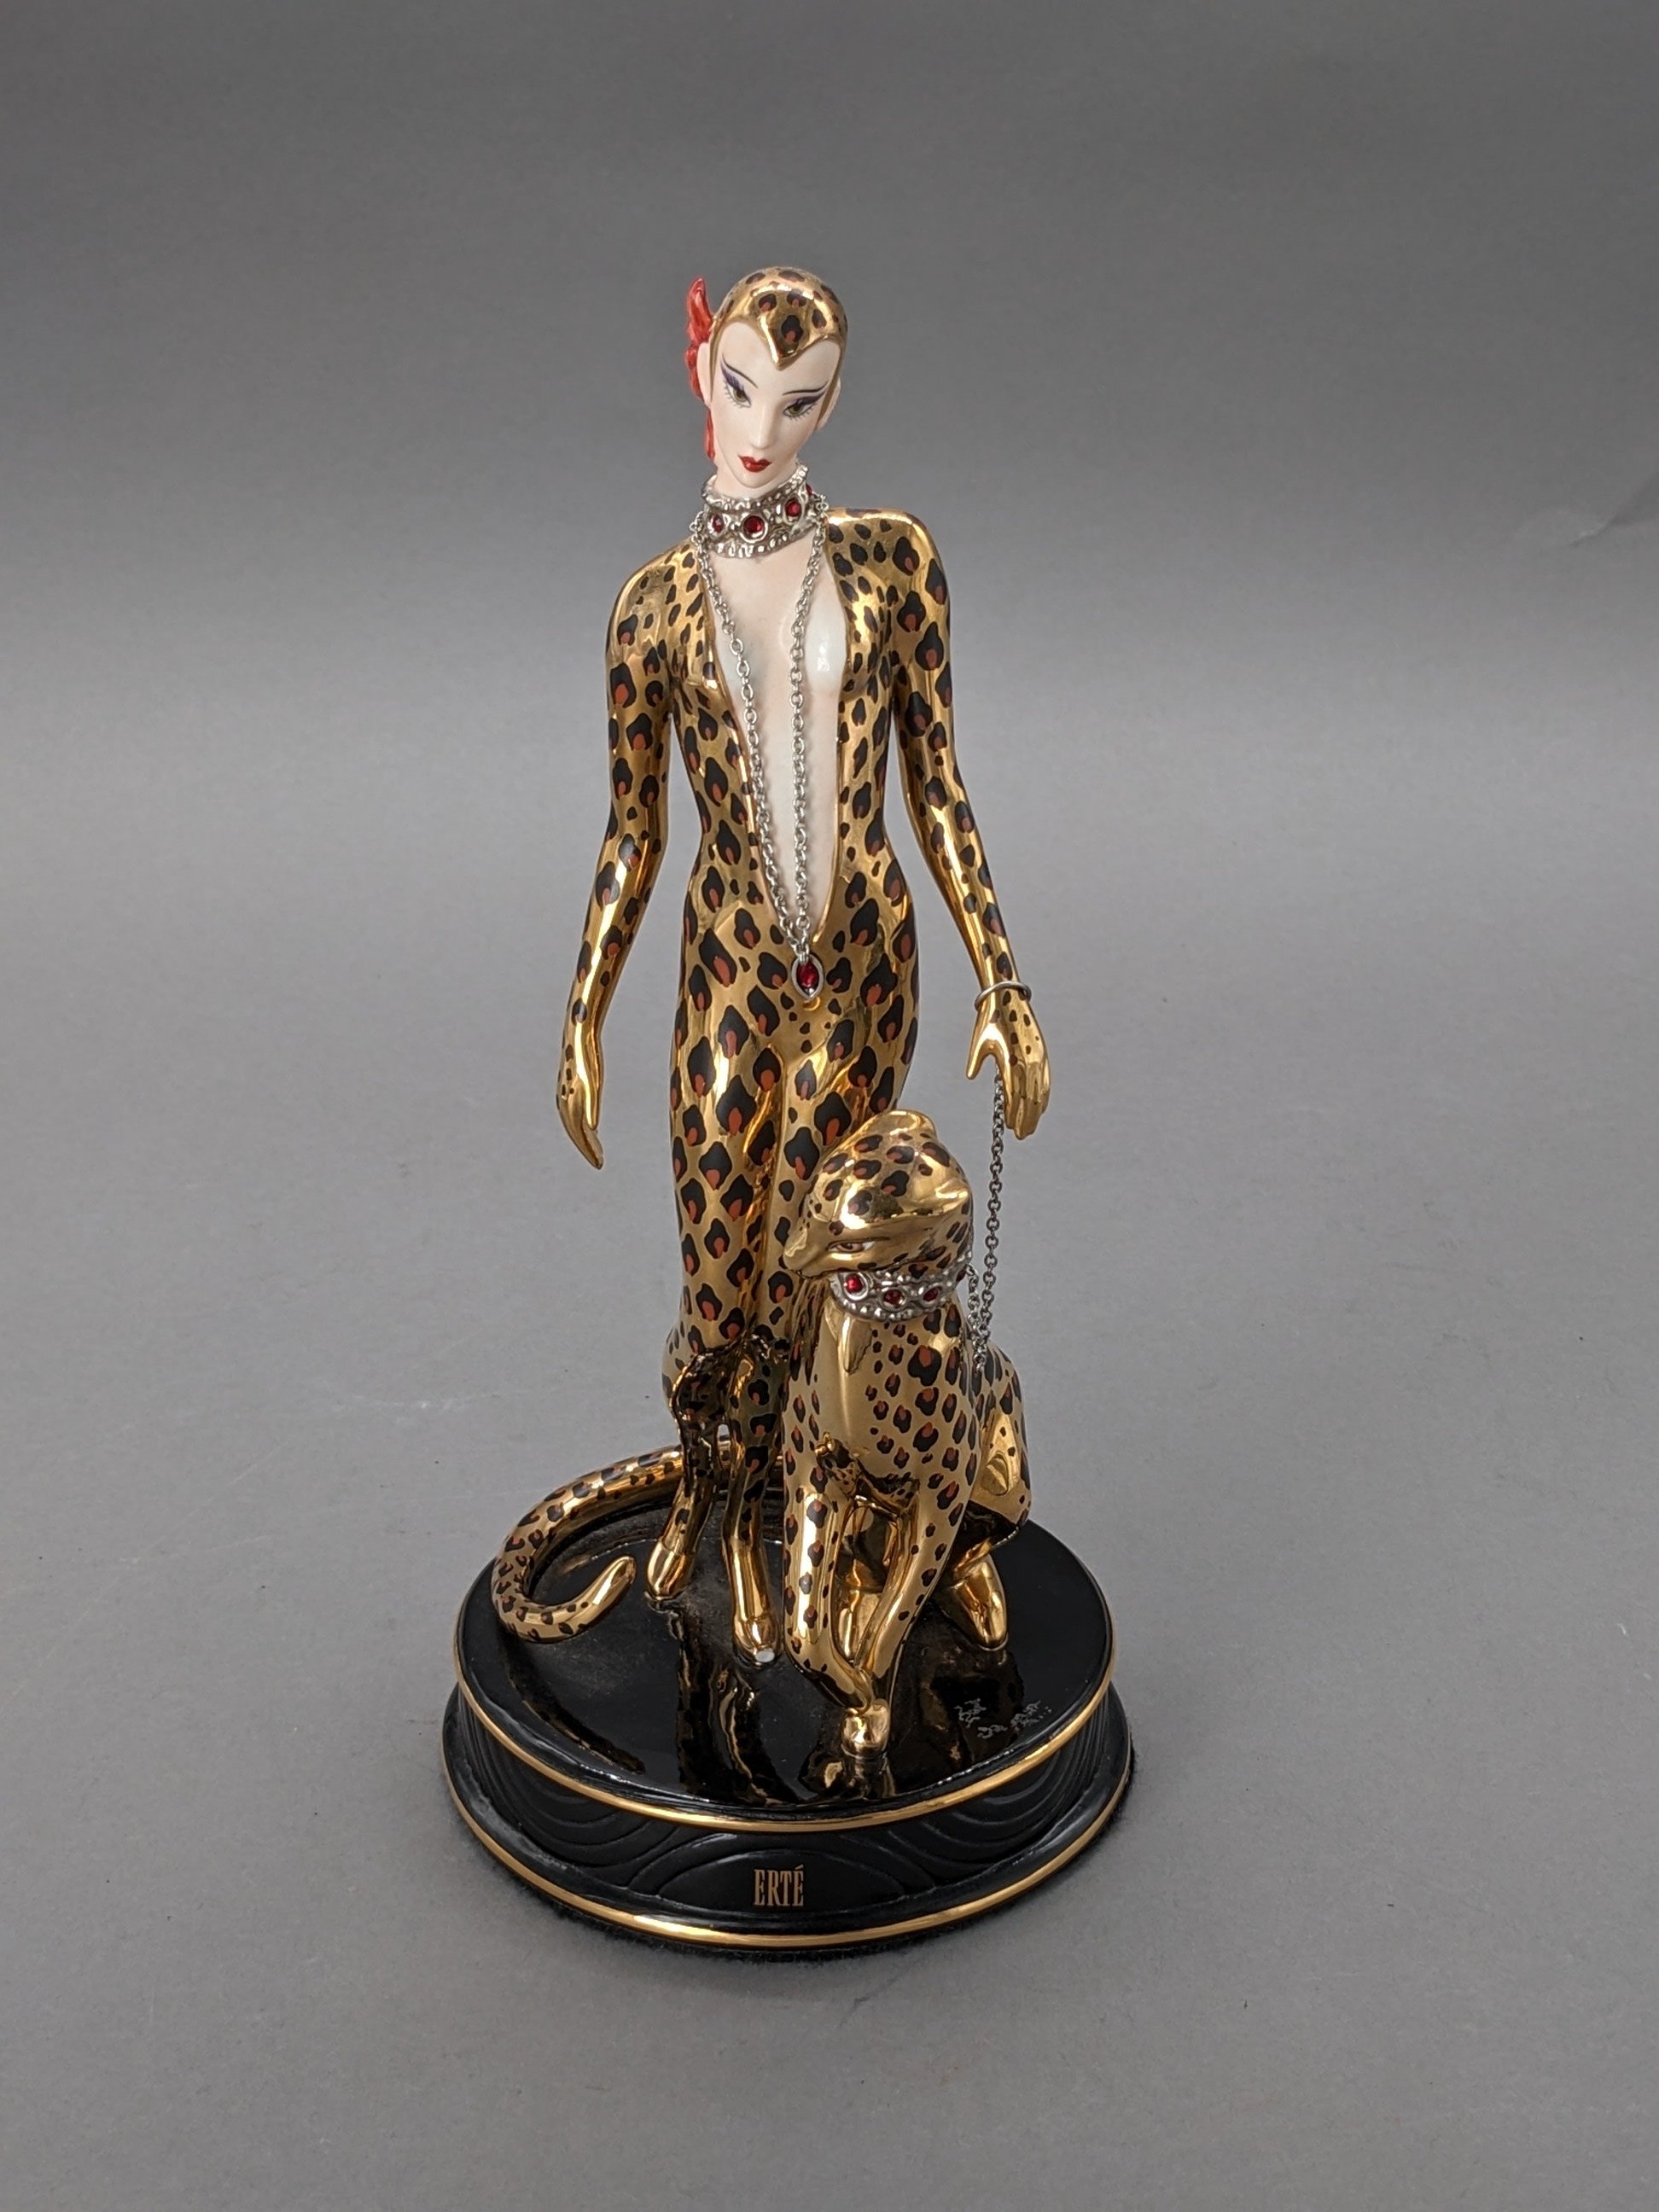 House Of Erte Hand Painted Porcelain Figurines